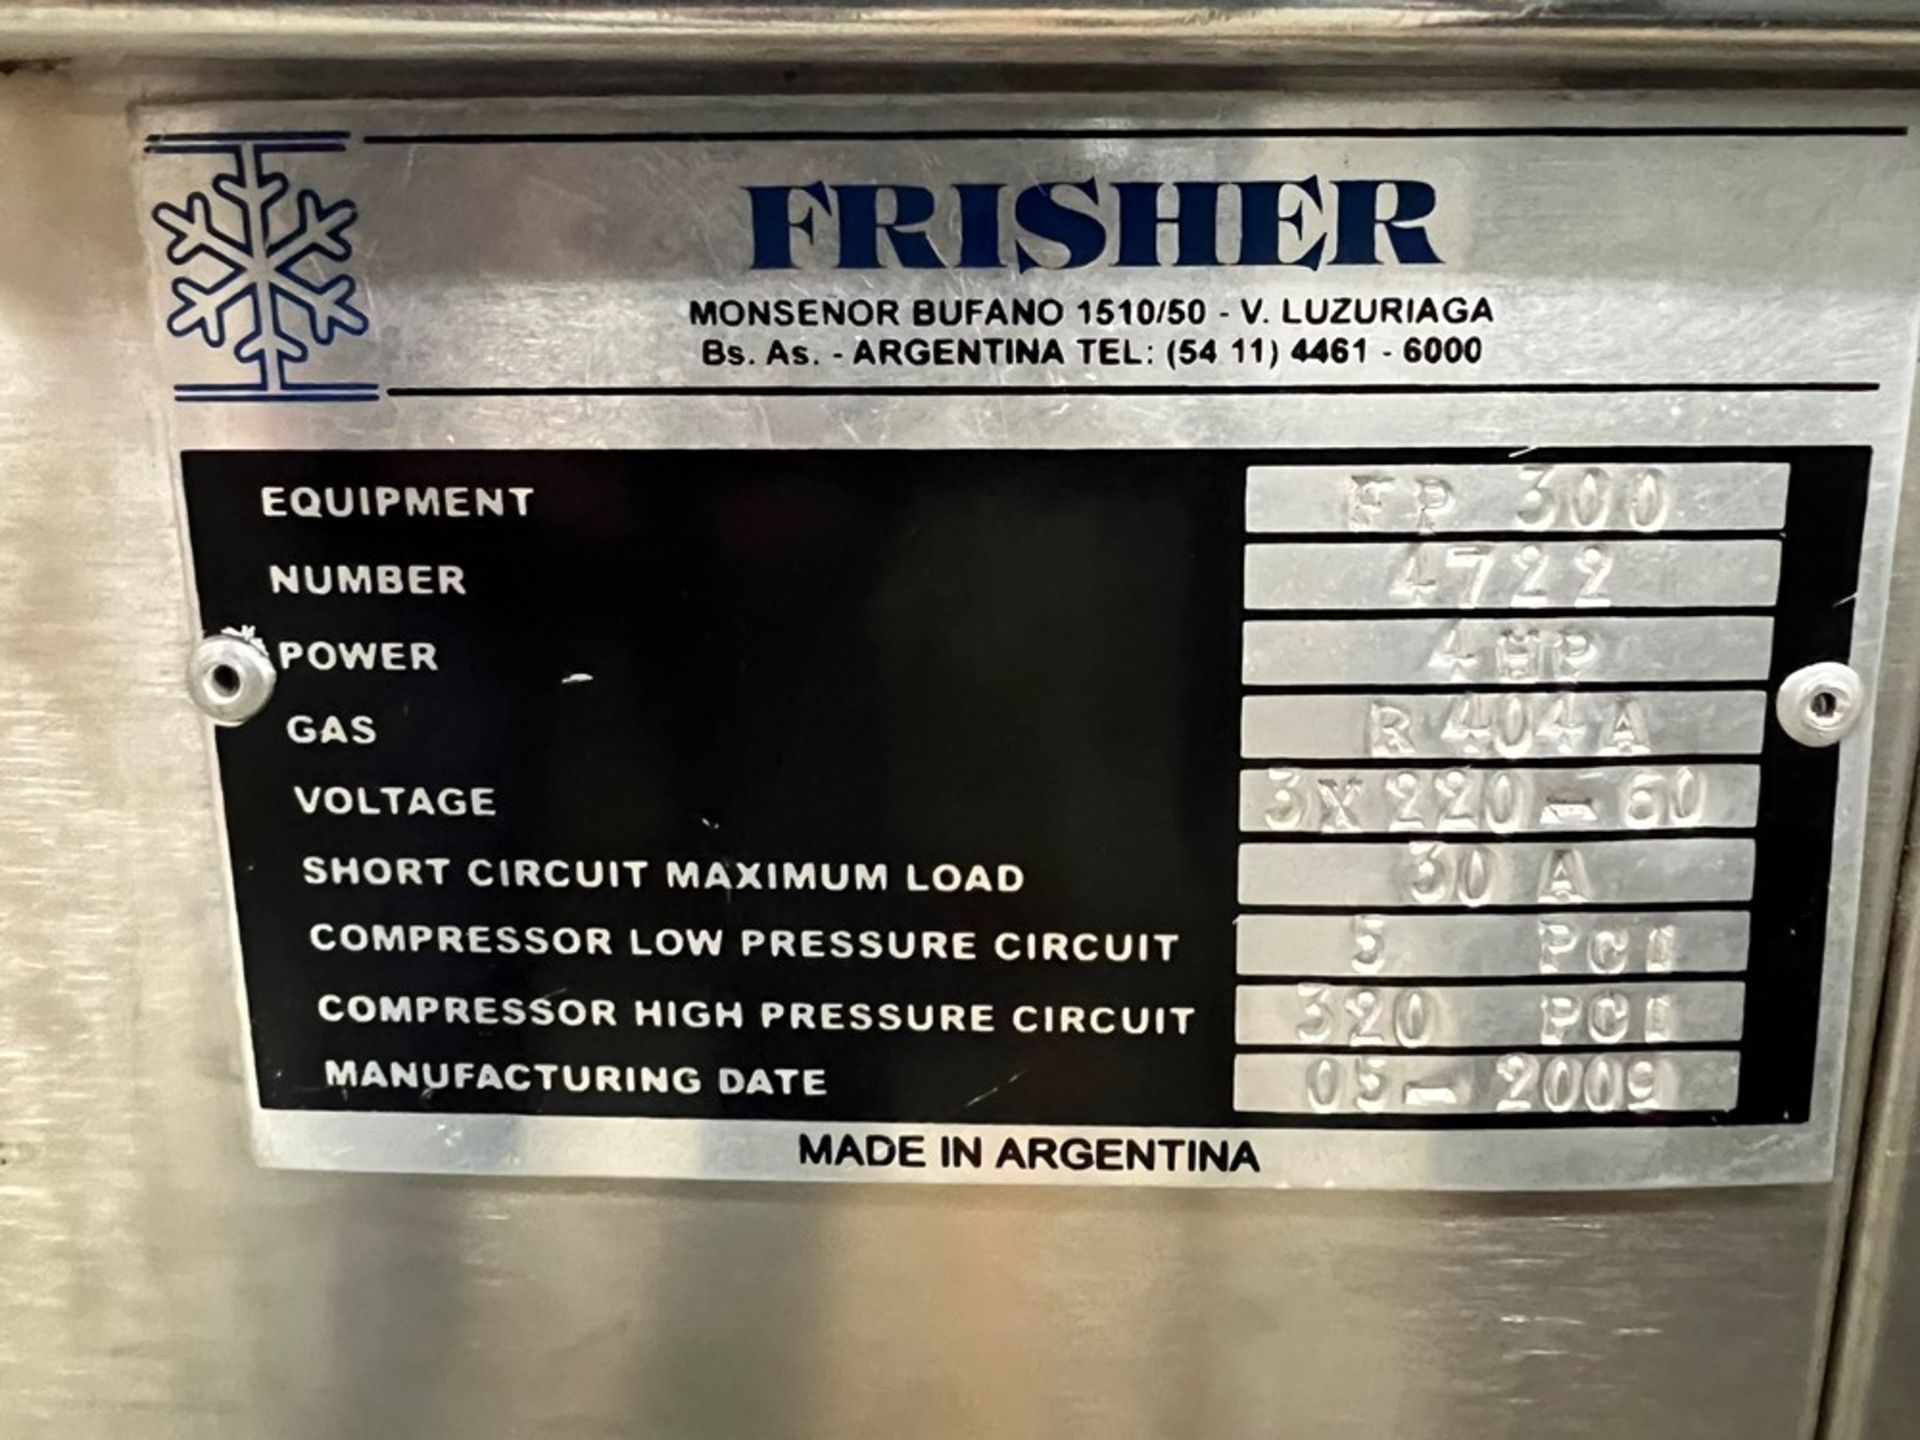 Frisher Mdl. FP300 Ice Cream Stick Maker, manual controls, digital readout, 230 volts, 3 phase ( - Image 4 of 4